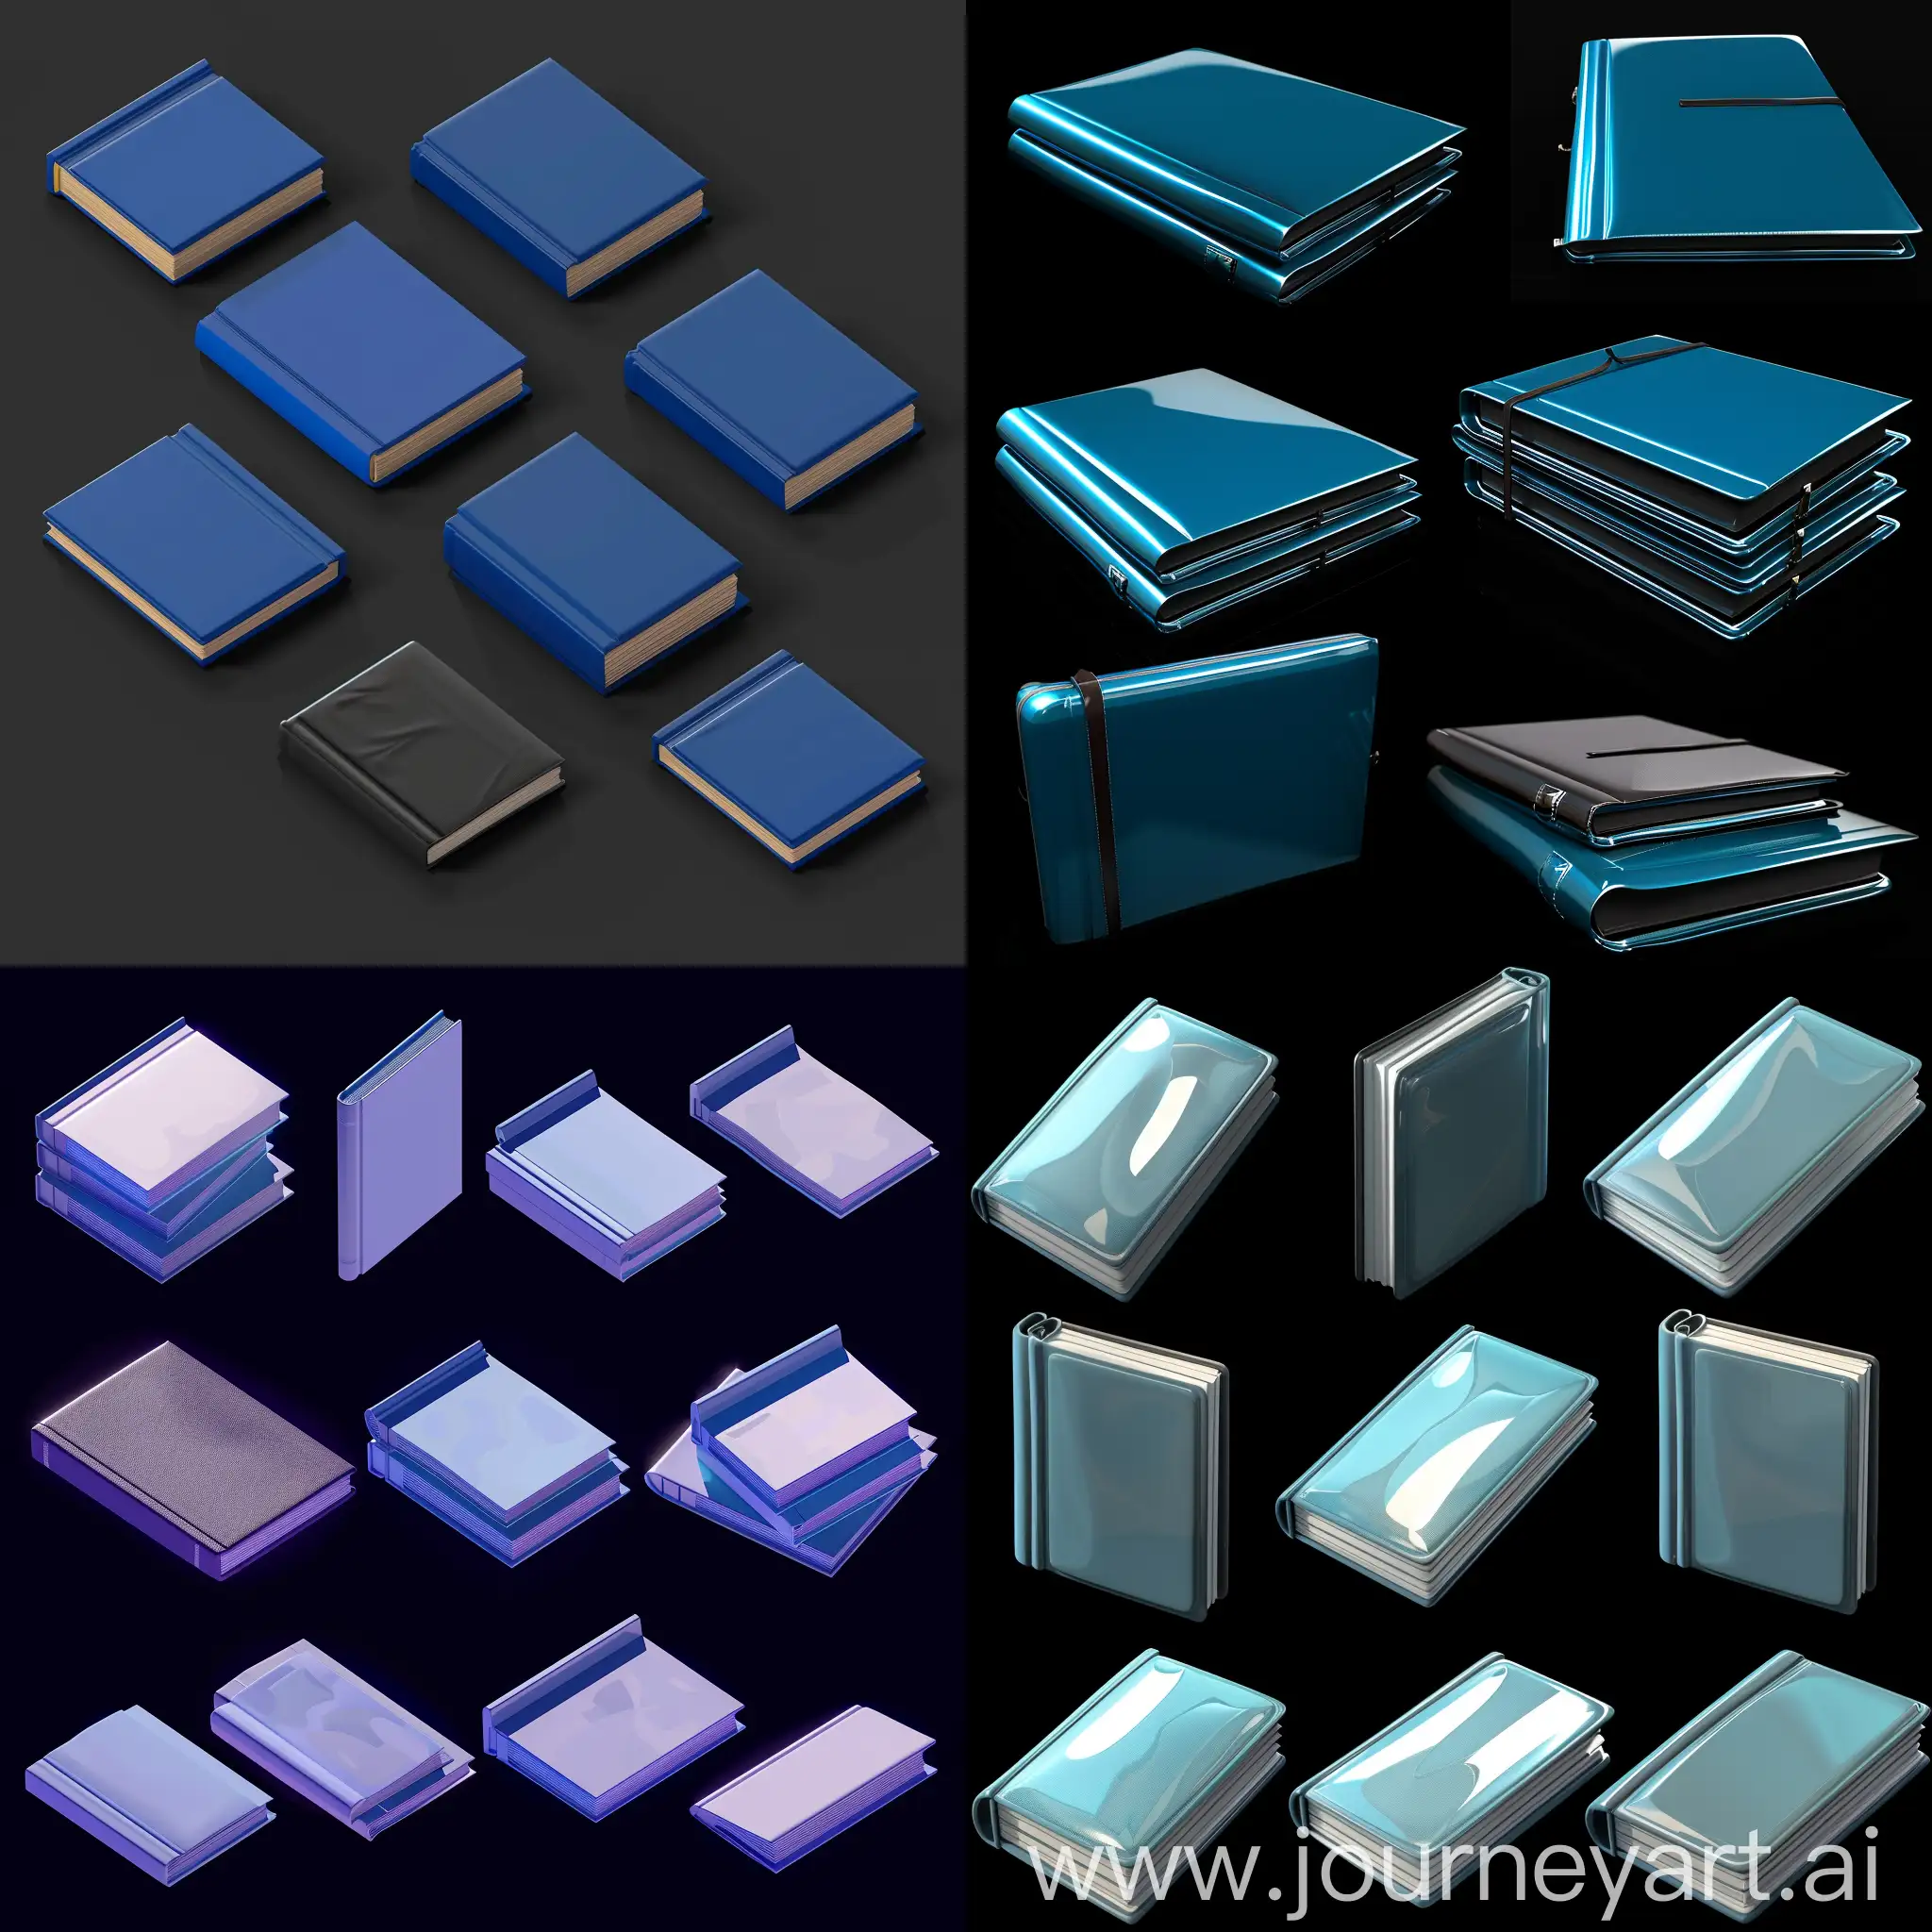 Isometric-Blue-Textbooks-on-Black-Background-Realistic-3D-Render-with-Shiny-Leather-Cover